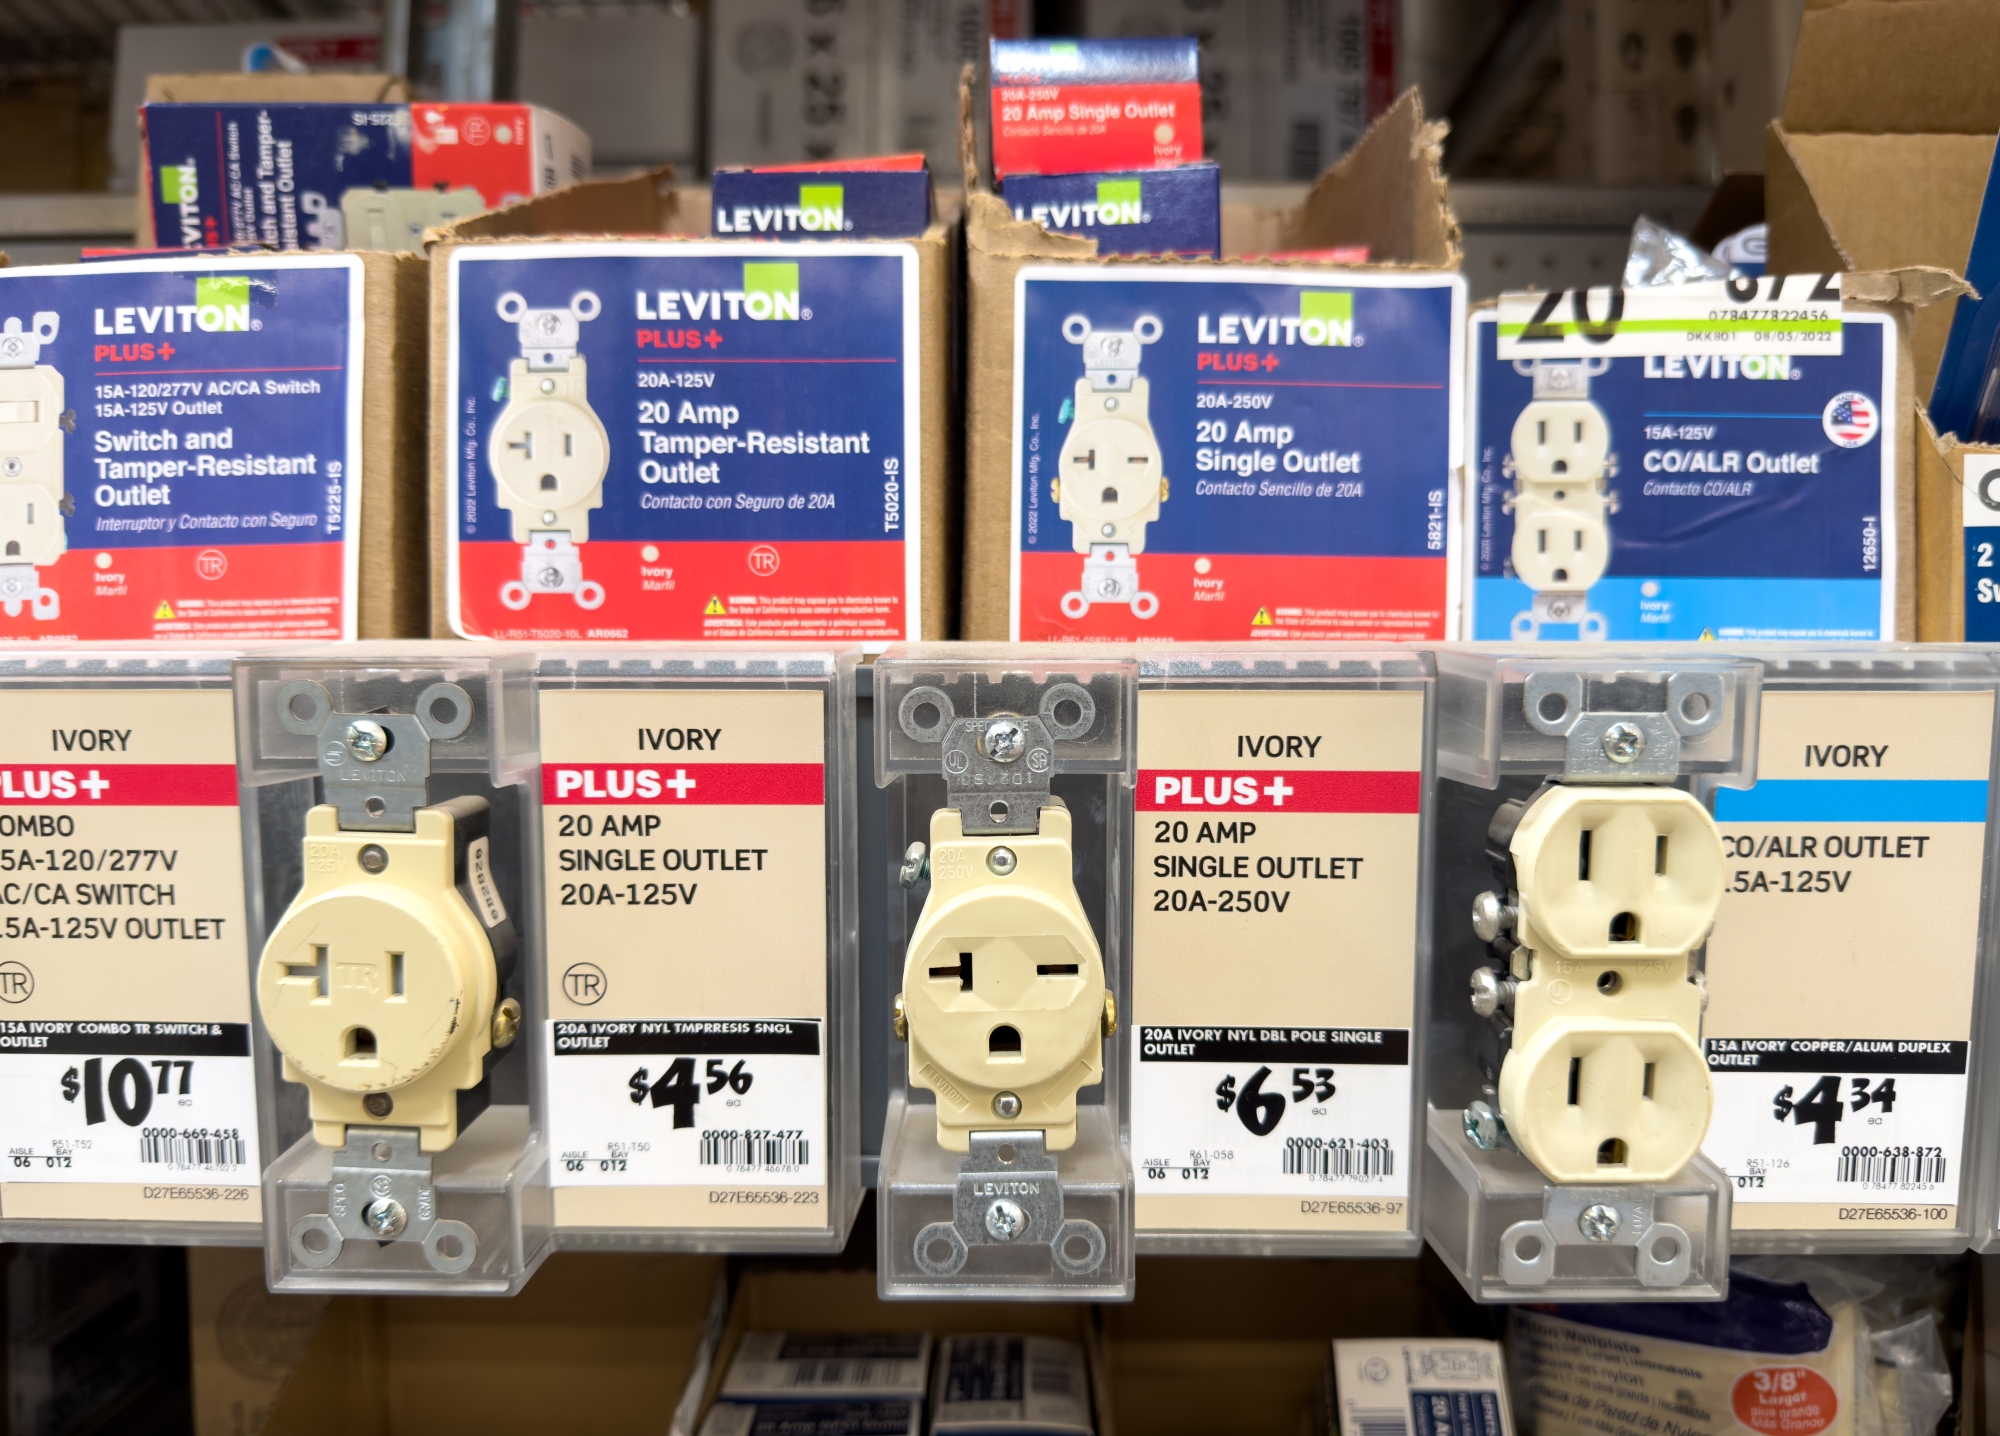 receptacle for 20 amps, 240/250 volts